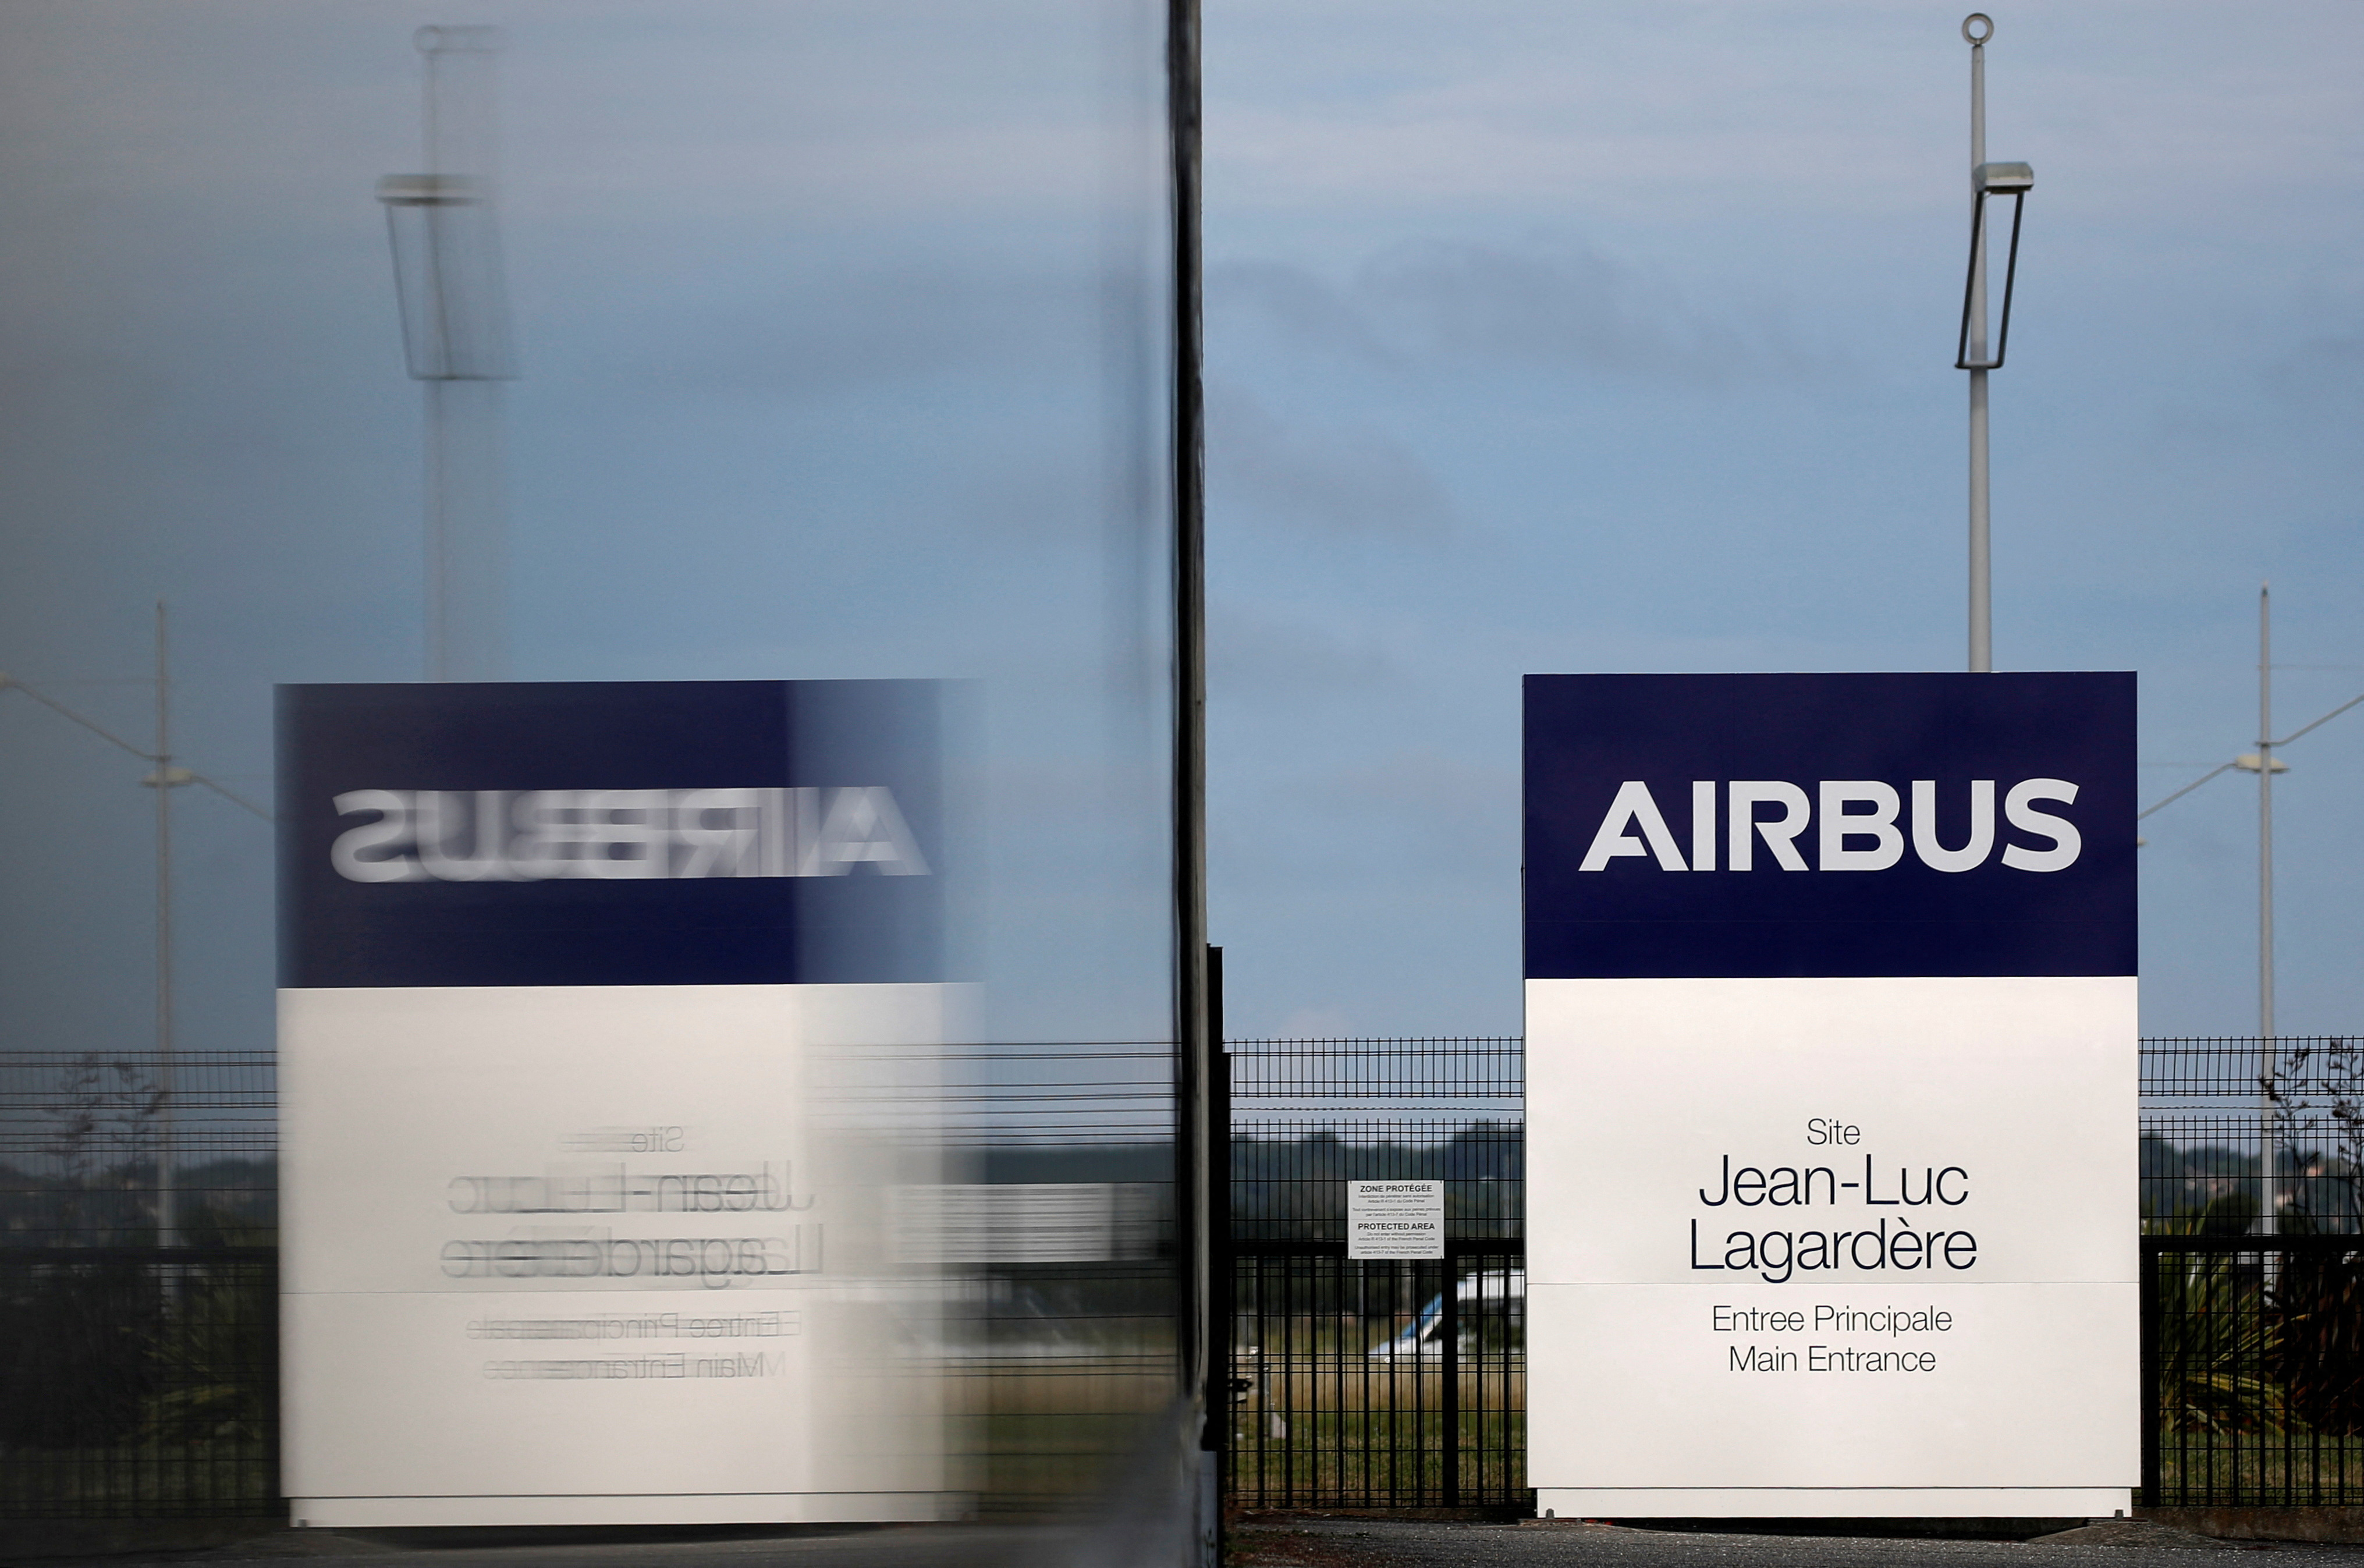 Entrance of the Jean-Luc Lagardere A380 production plant at Airbus headquarters in Blagnac